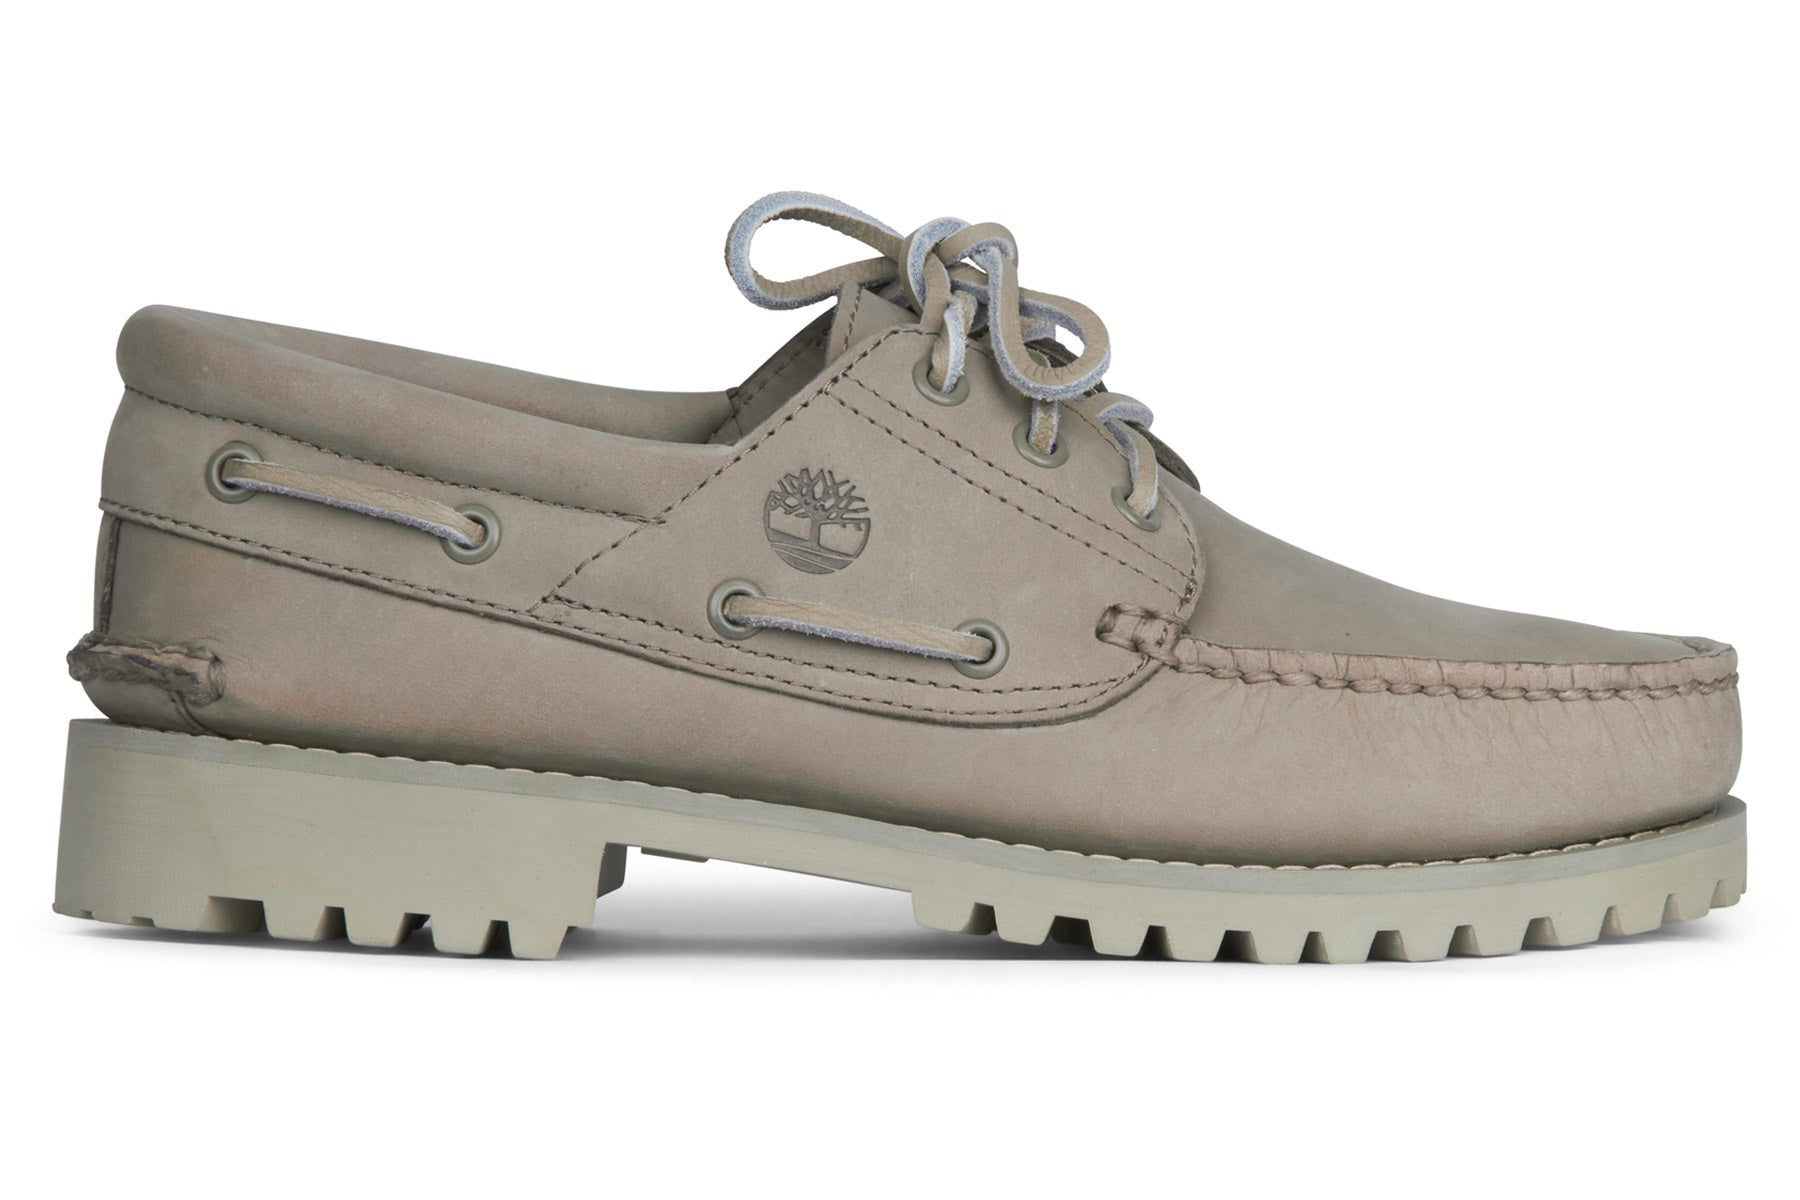 Timberland Authentics Lace Up Boat Shoe - Light Taupe